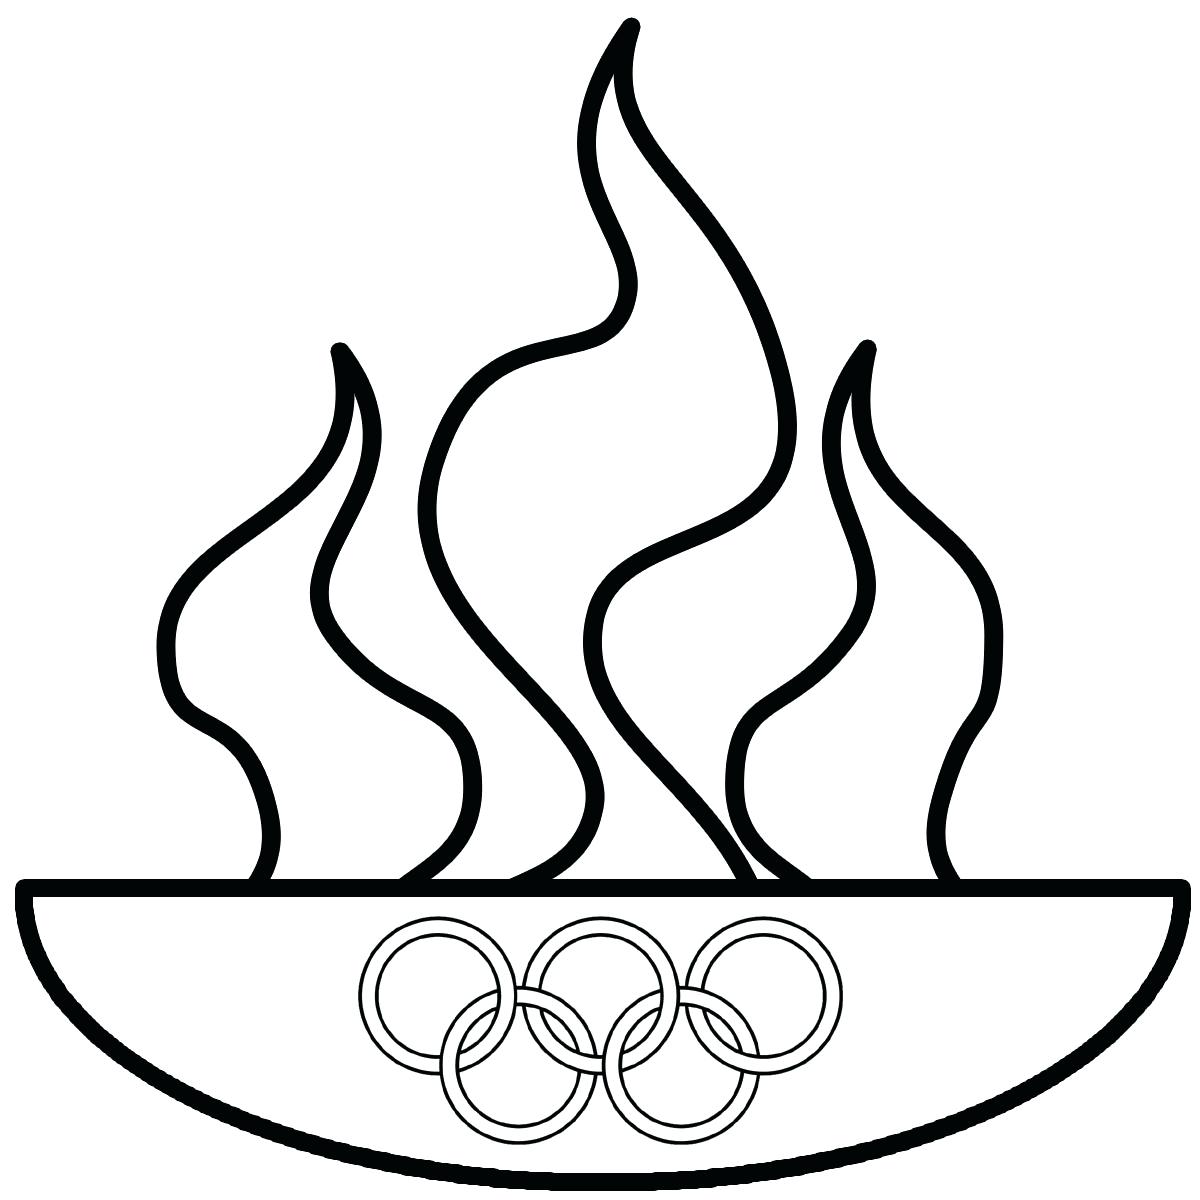 olympic rings drawing at getdrawingscom free for